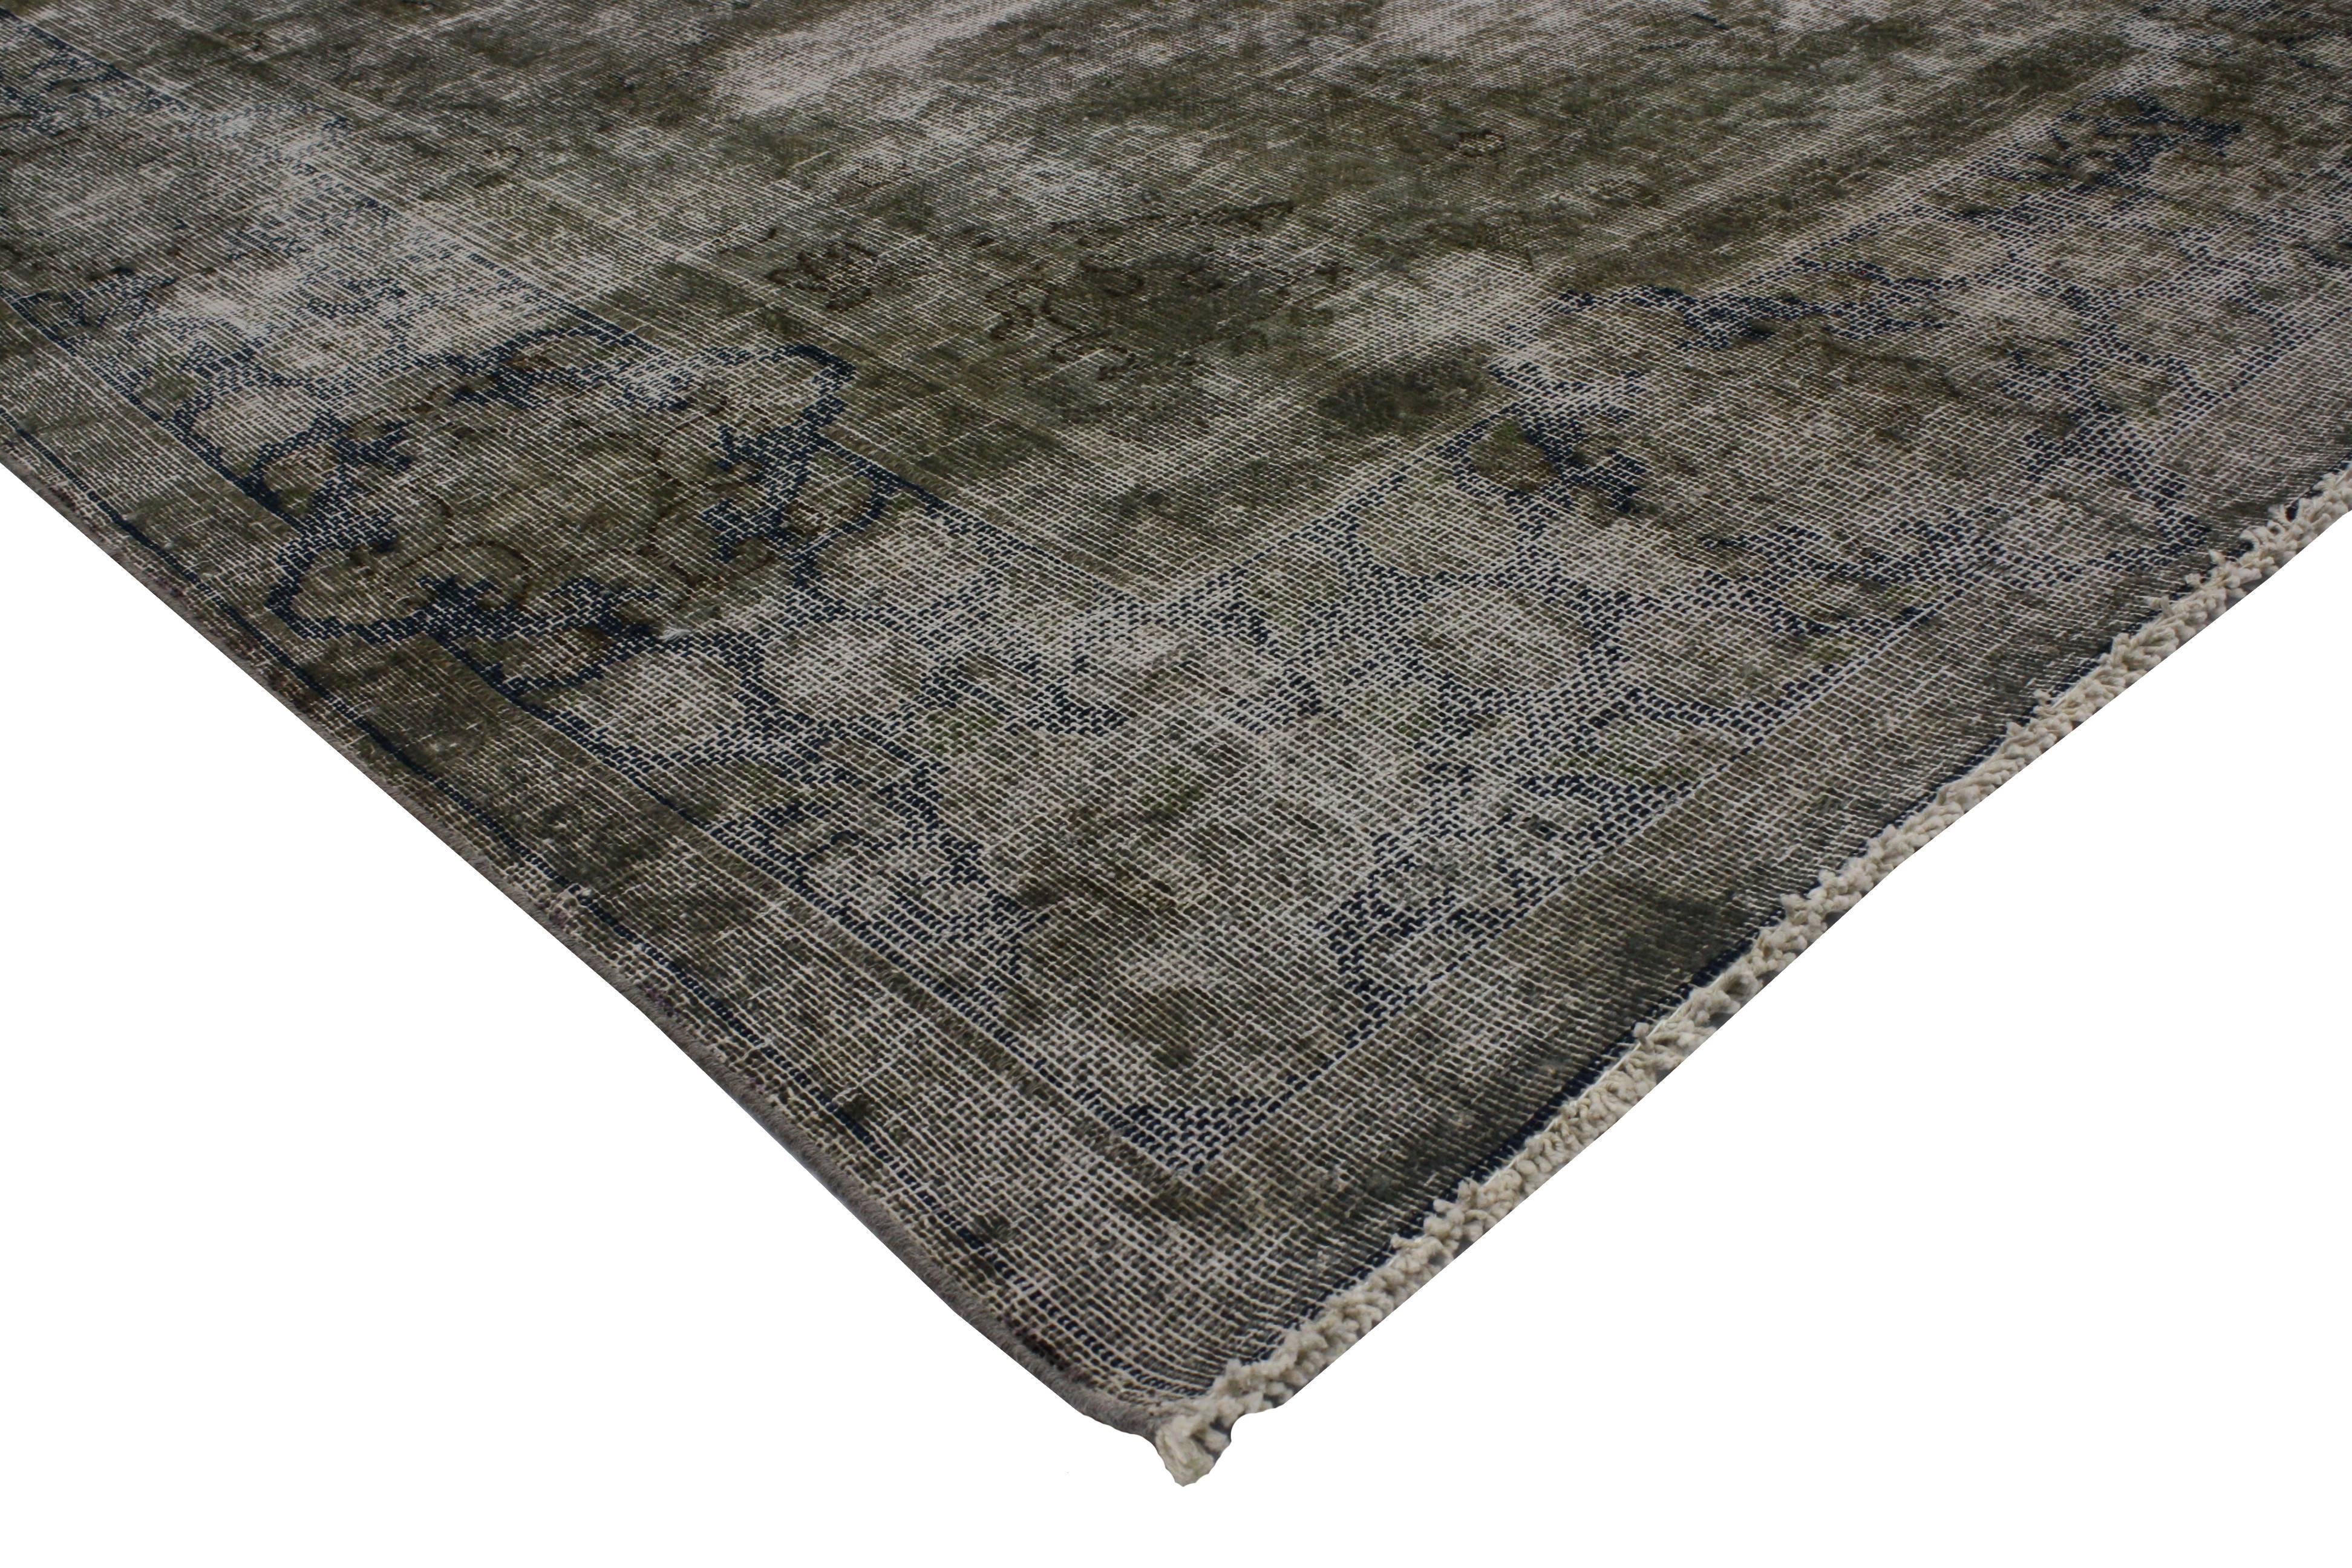 80255 Vintage Overdyed Brown Rug, 06’09 x 10’06.
​Exuding an air of sophistication and rustic sensibility, this hand-knotted wool vintage overdyed brown rug effortlessly captures the essence of bucolic charm with a modern twist. Prepare to be